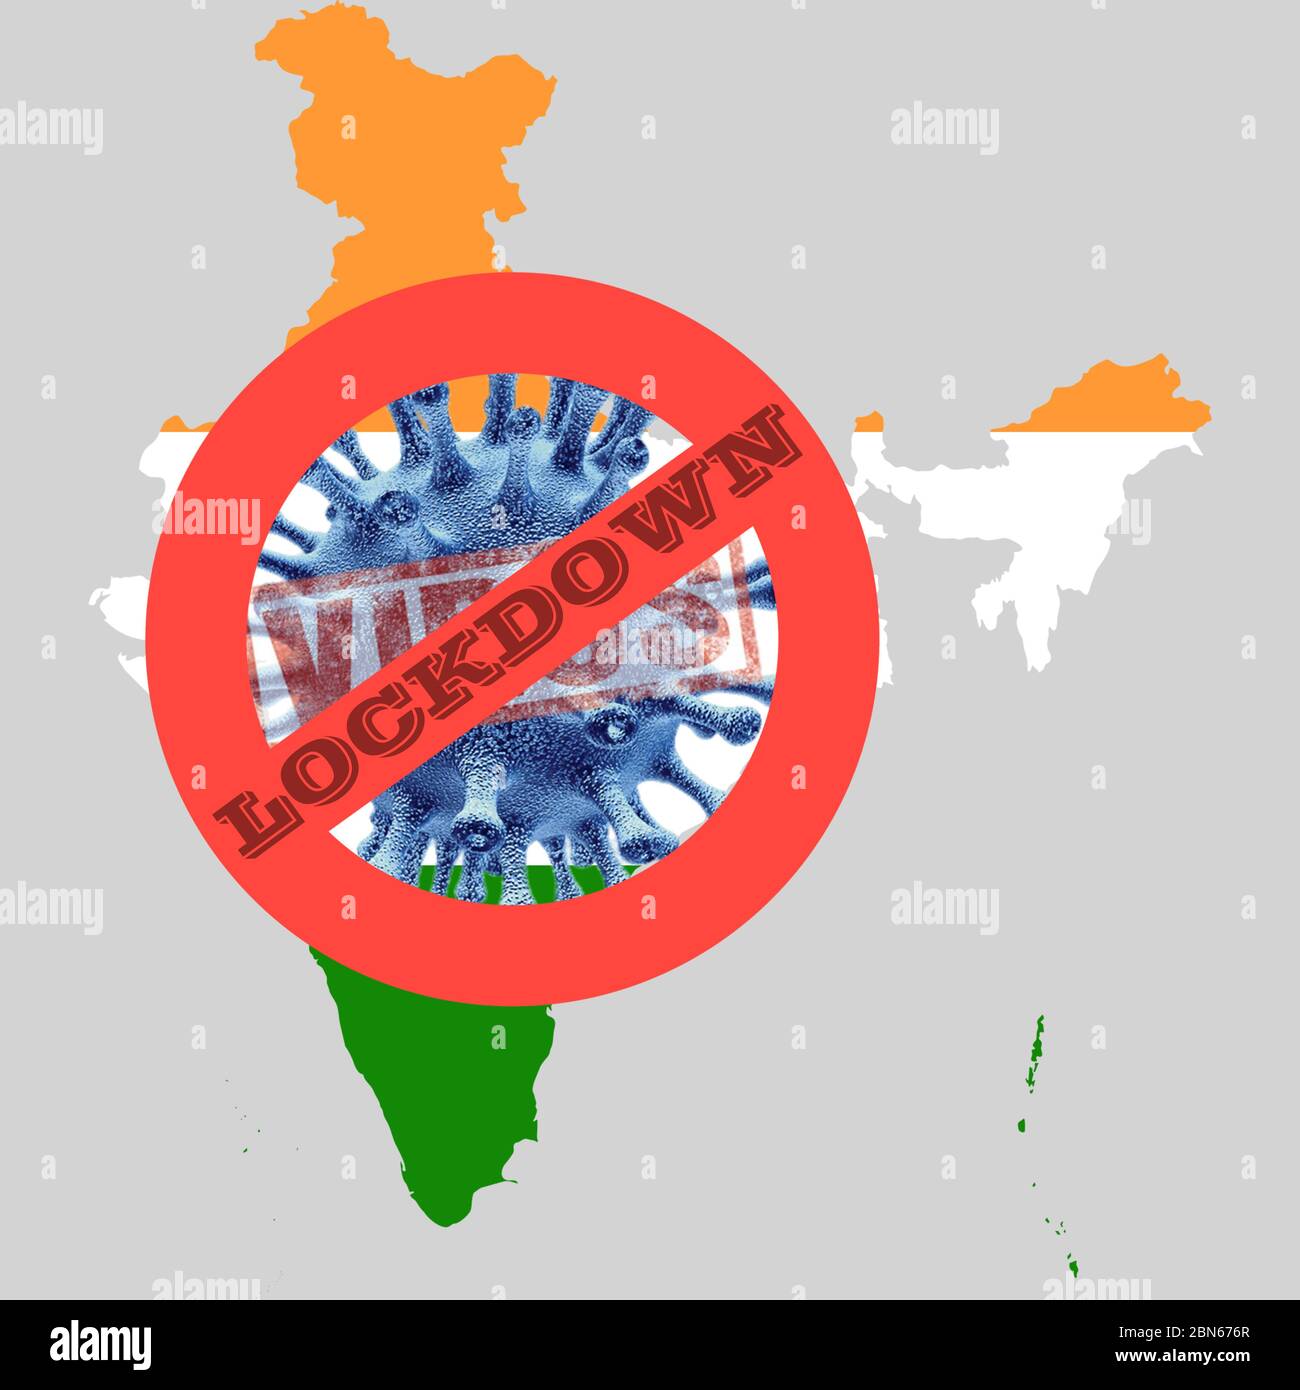 Indian Map warning for COVID-2019. SARS-nCOV-19. Fight against Virus pandemic Stock Photo